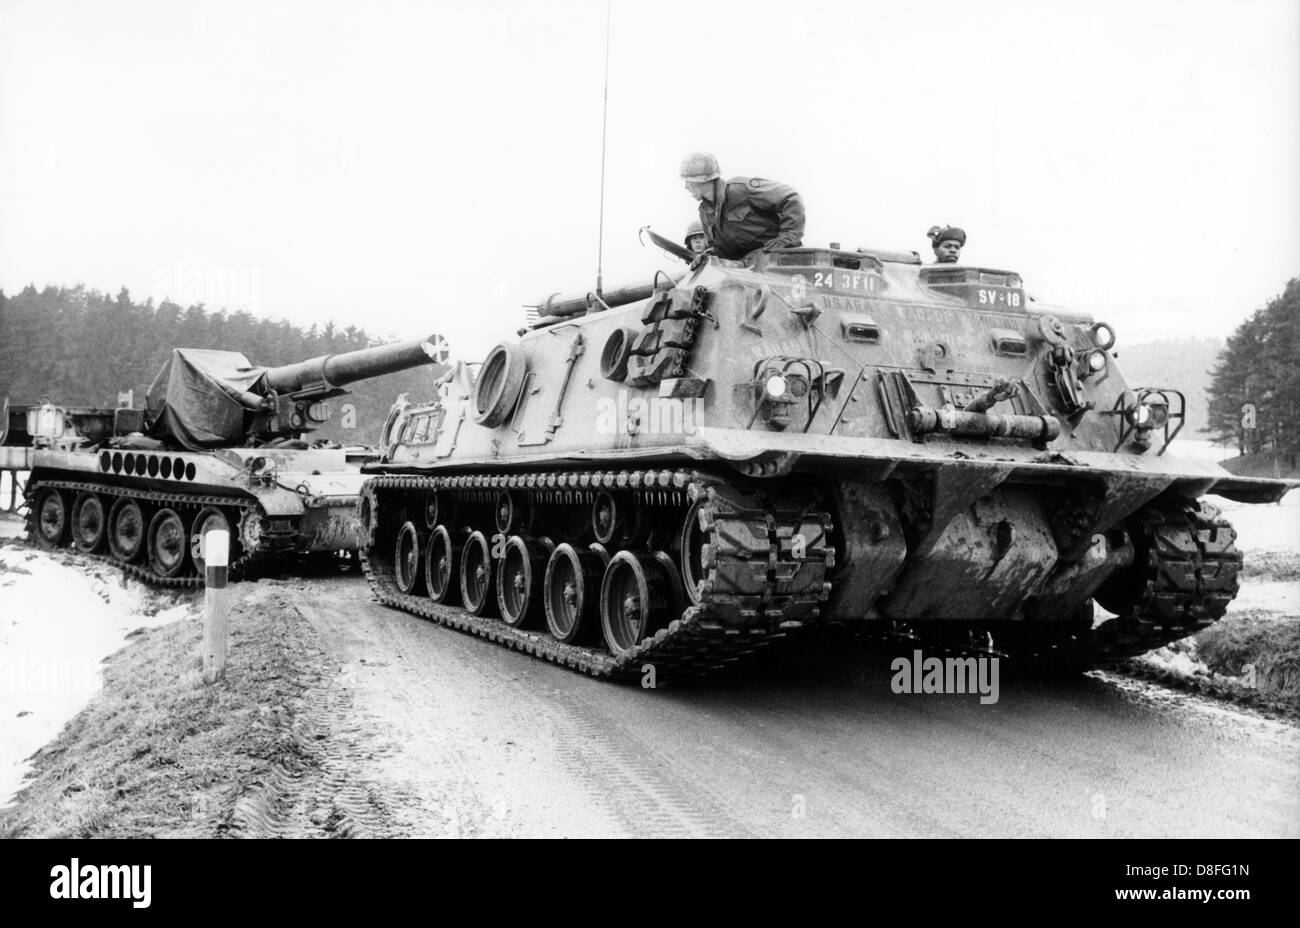 An armored tank of the US army is pulling a self-propelled artillery vehicle during the NATO maneuver REFORGER I - 'Return of Forces to Germany', on 30th January 1969 near Grafenwöhr, Bavaria. Stock Photo